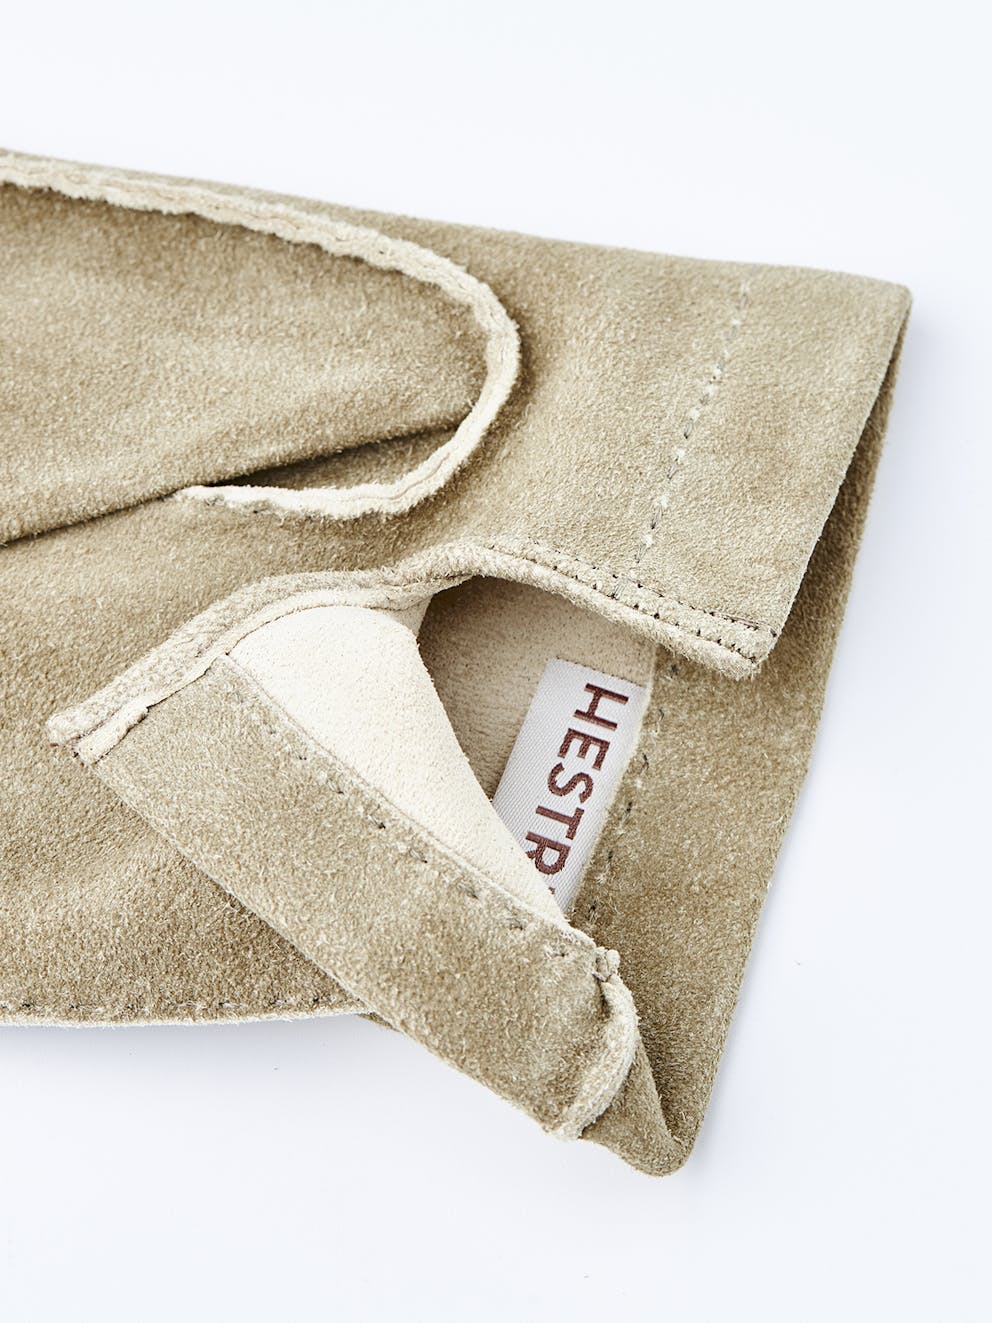 Gloves - | Hestra Chamois Sand Unlined Handsewn